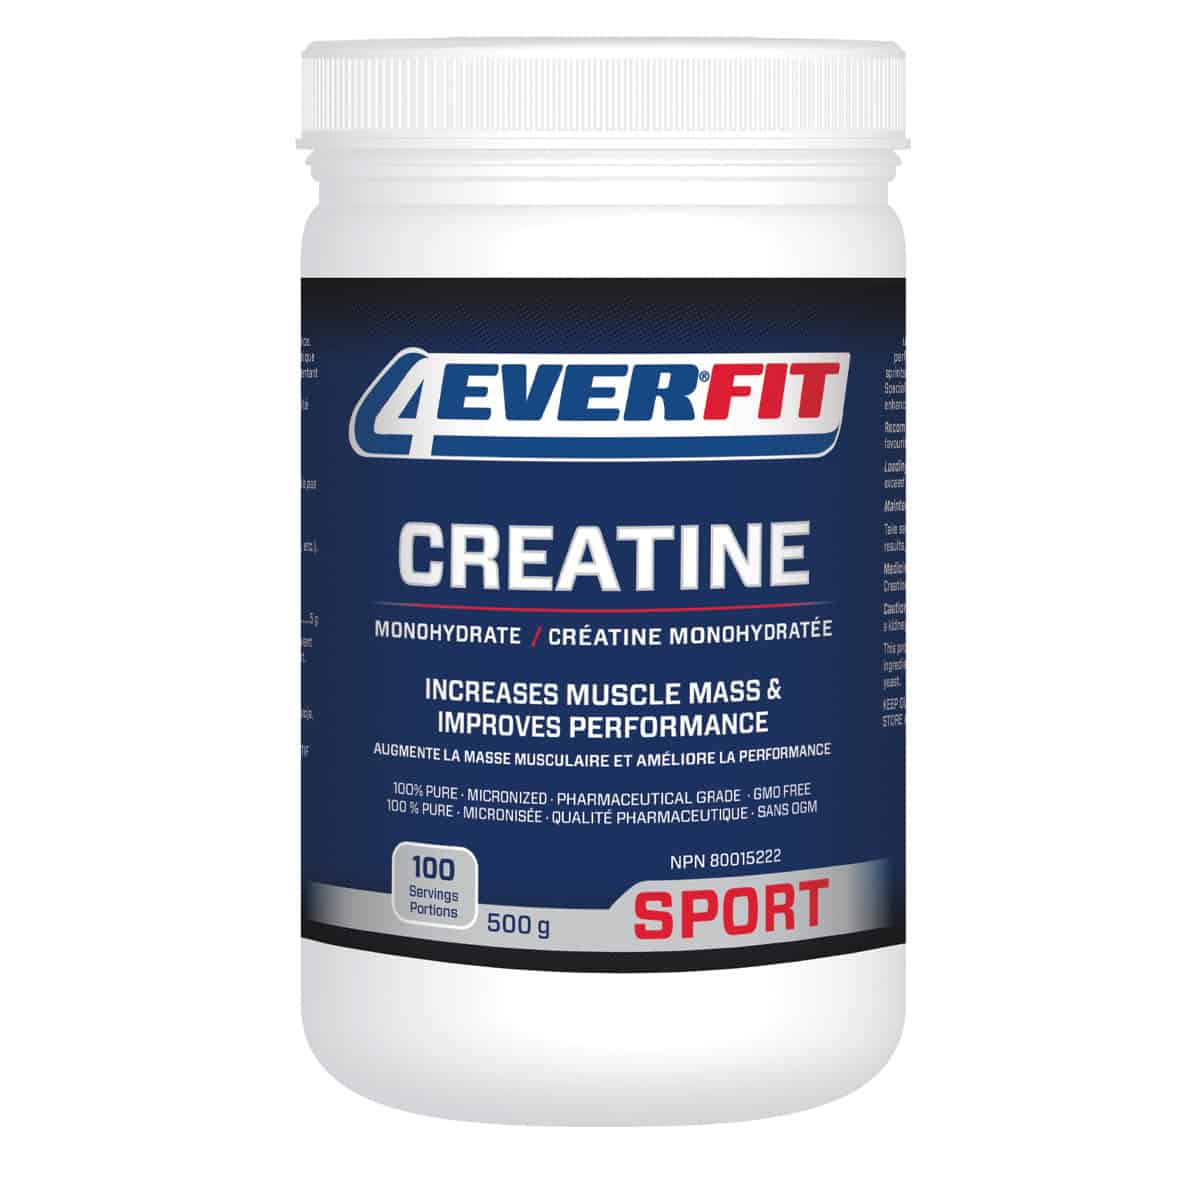 Featured image for “Creatine Monohydrate”